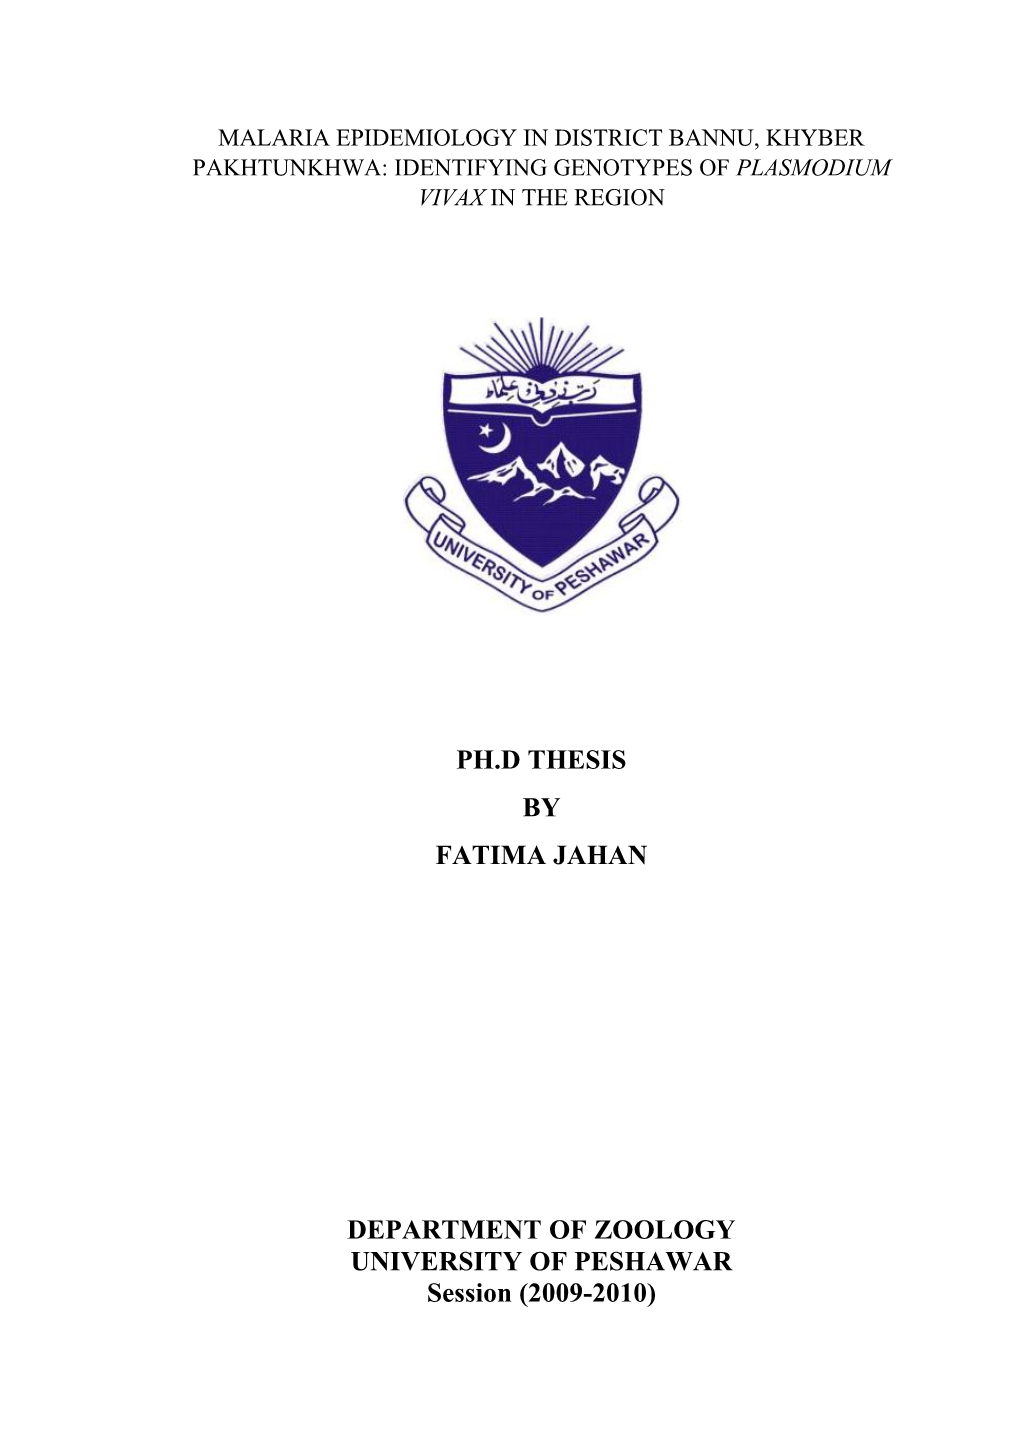 Ph.D Thesis by Fatima Jahan Department of Zoology